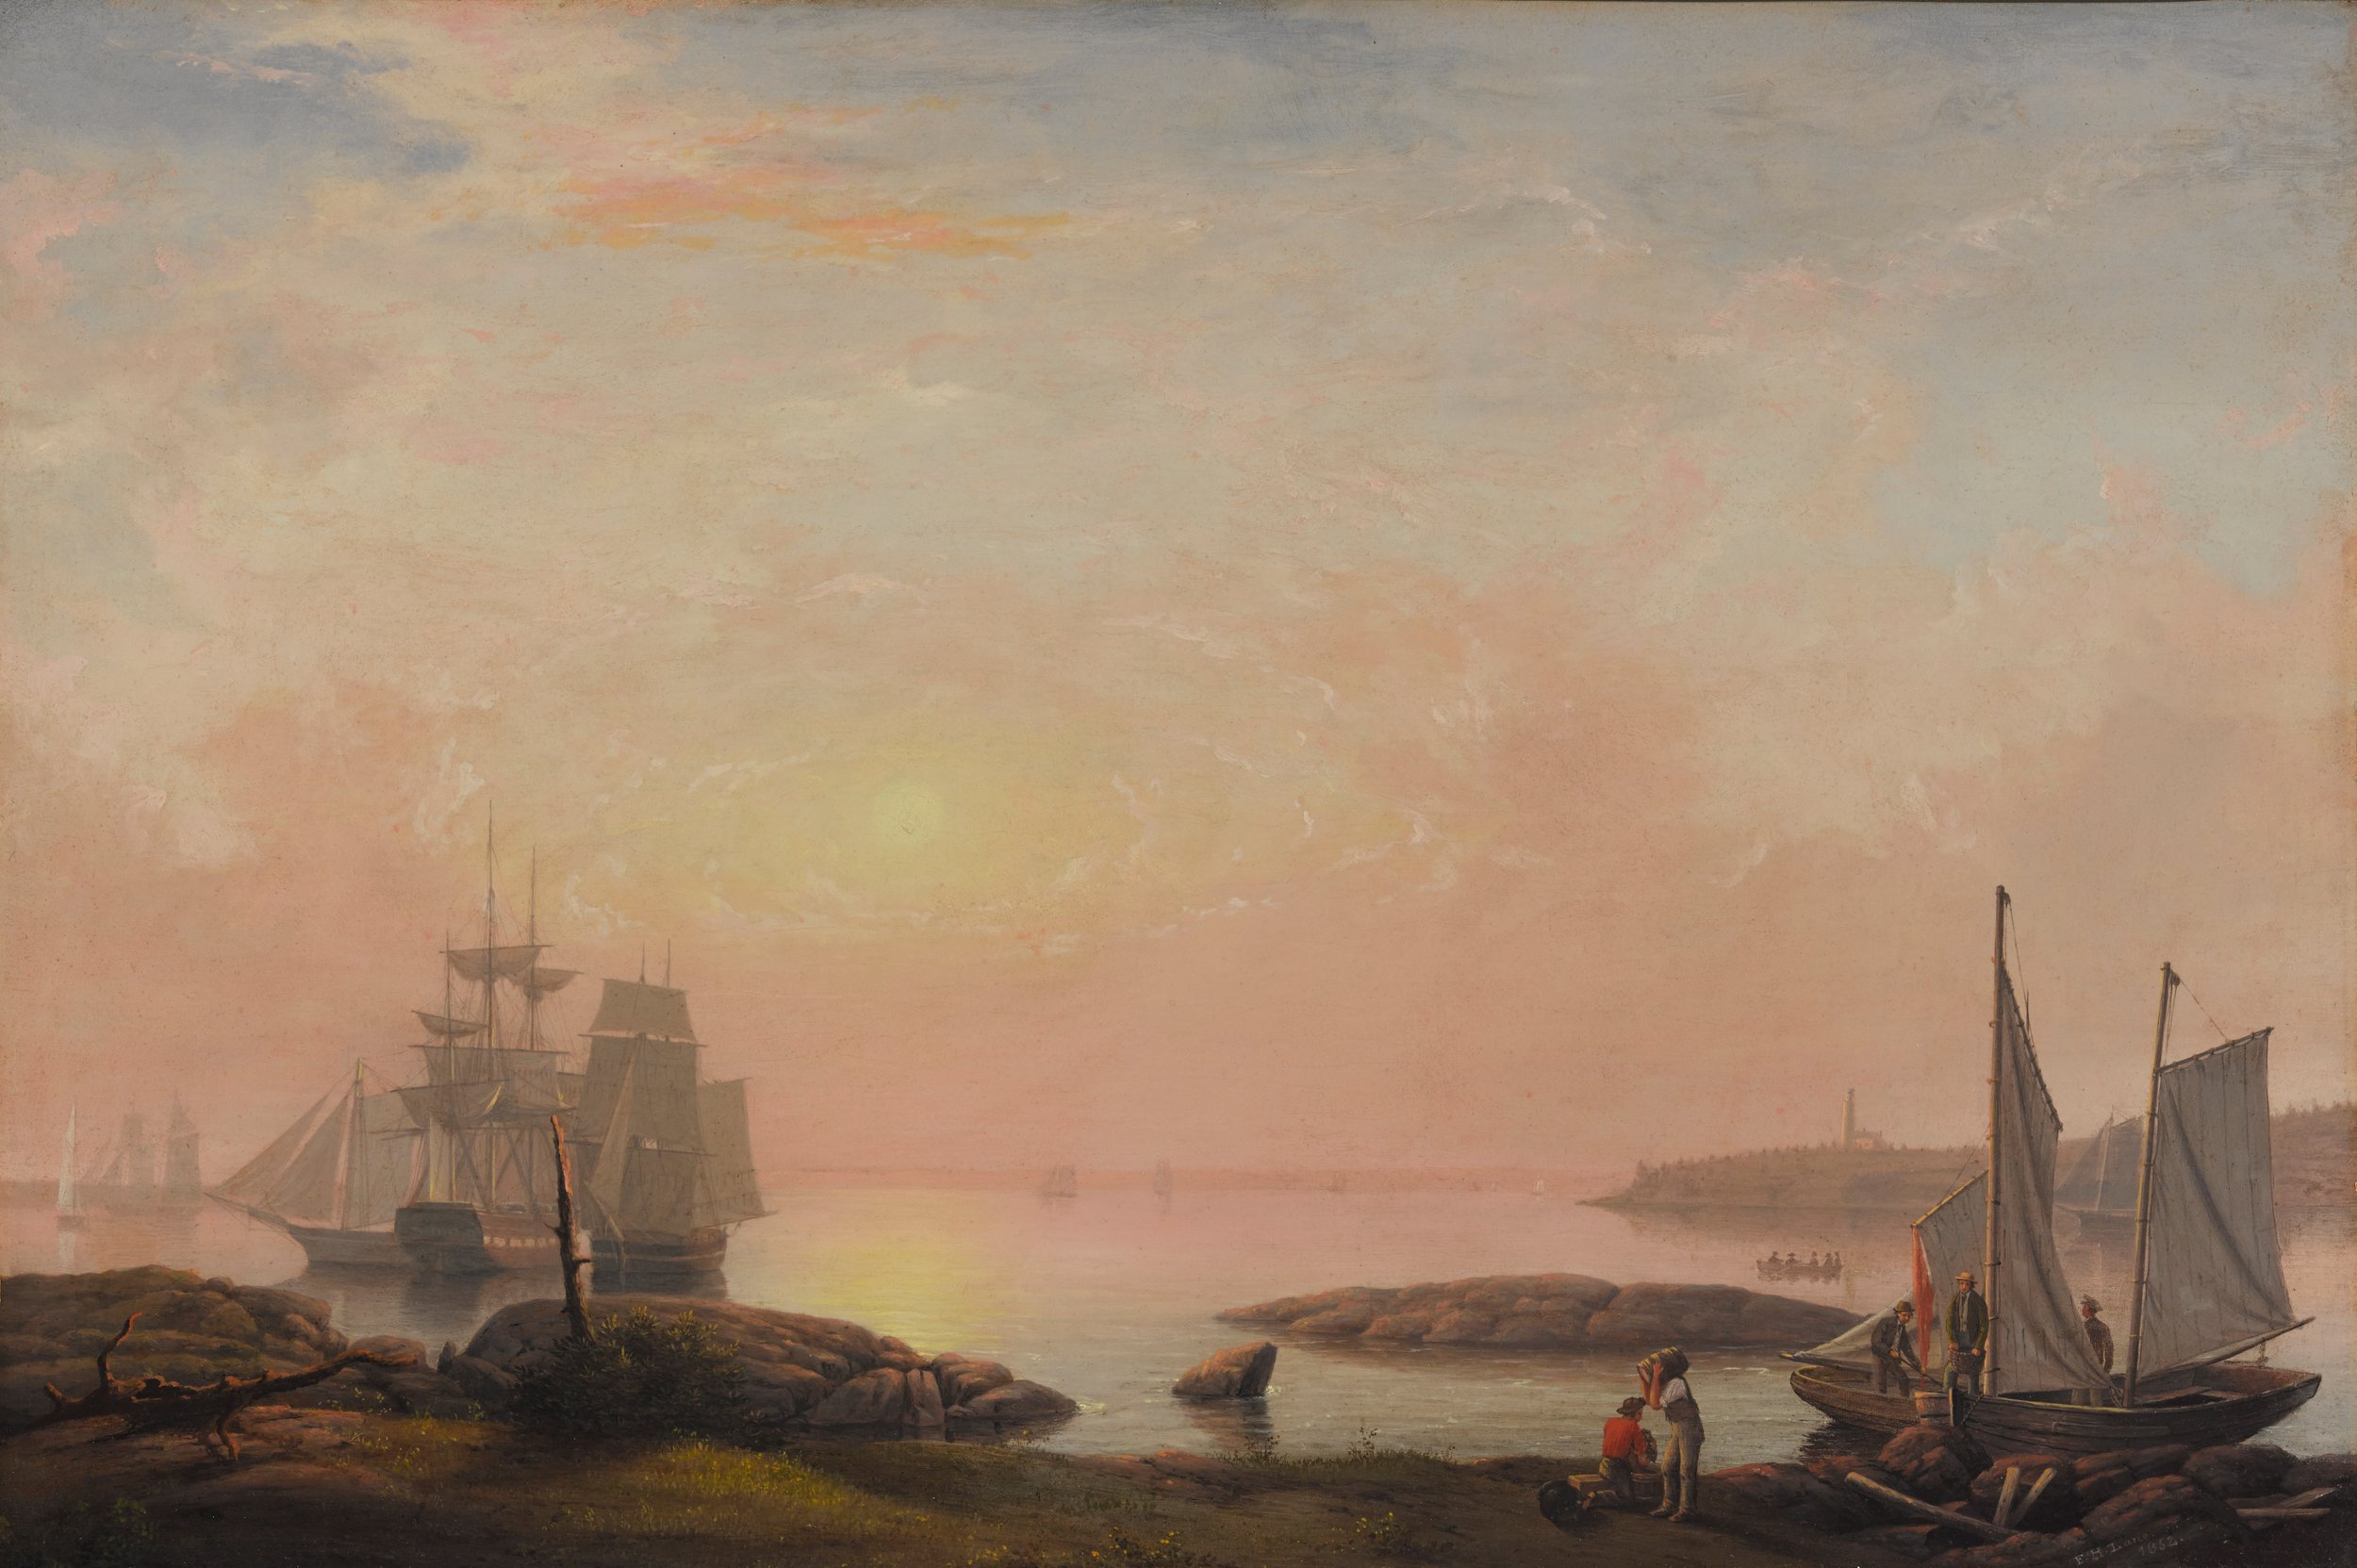   Fitz Henry Lane  United States, 1804–1865  Castine Harbor , 1852 oil on canvas, 20 1/8 x 30 1/8 inches Bequest of Elizabeth B. Noyce, 1996.38.29   